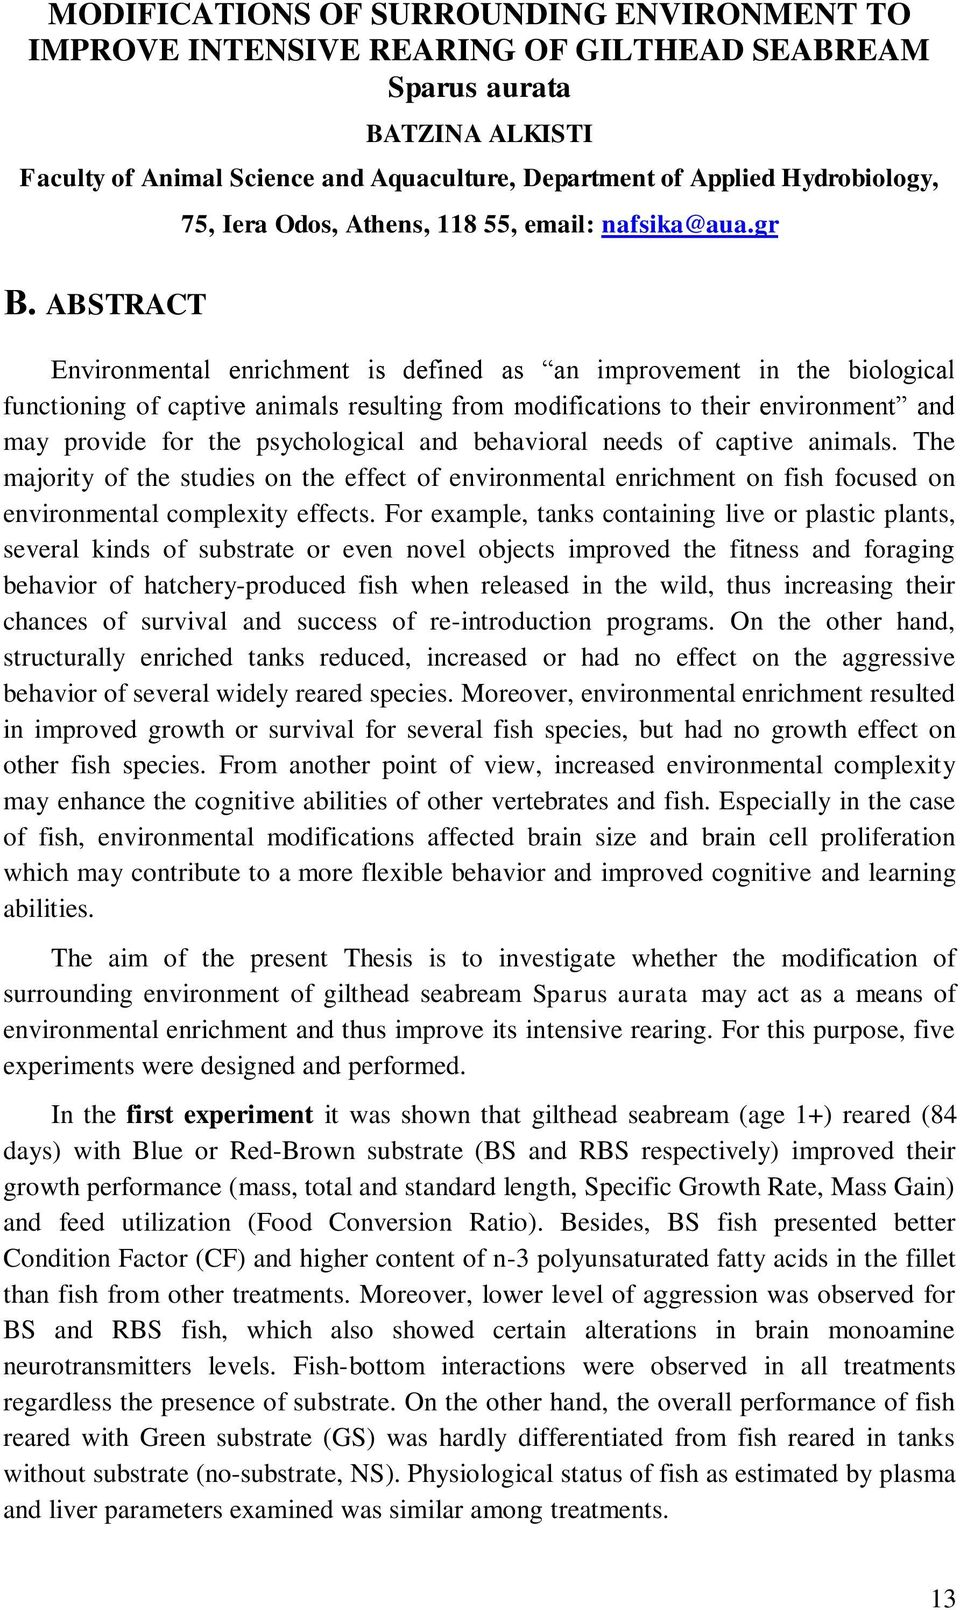 gr Environmental enrichment is defined as an improvement in the biological functioning of captive animals resulting from modifications to their environment and may provide for the psychological and